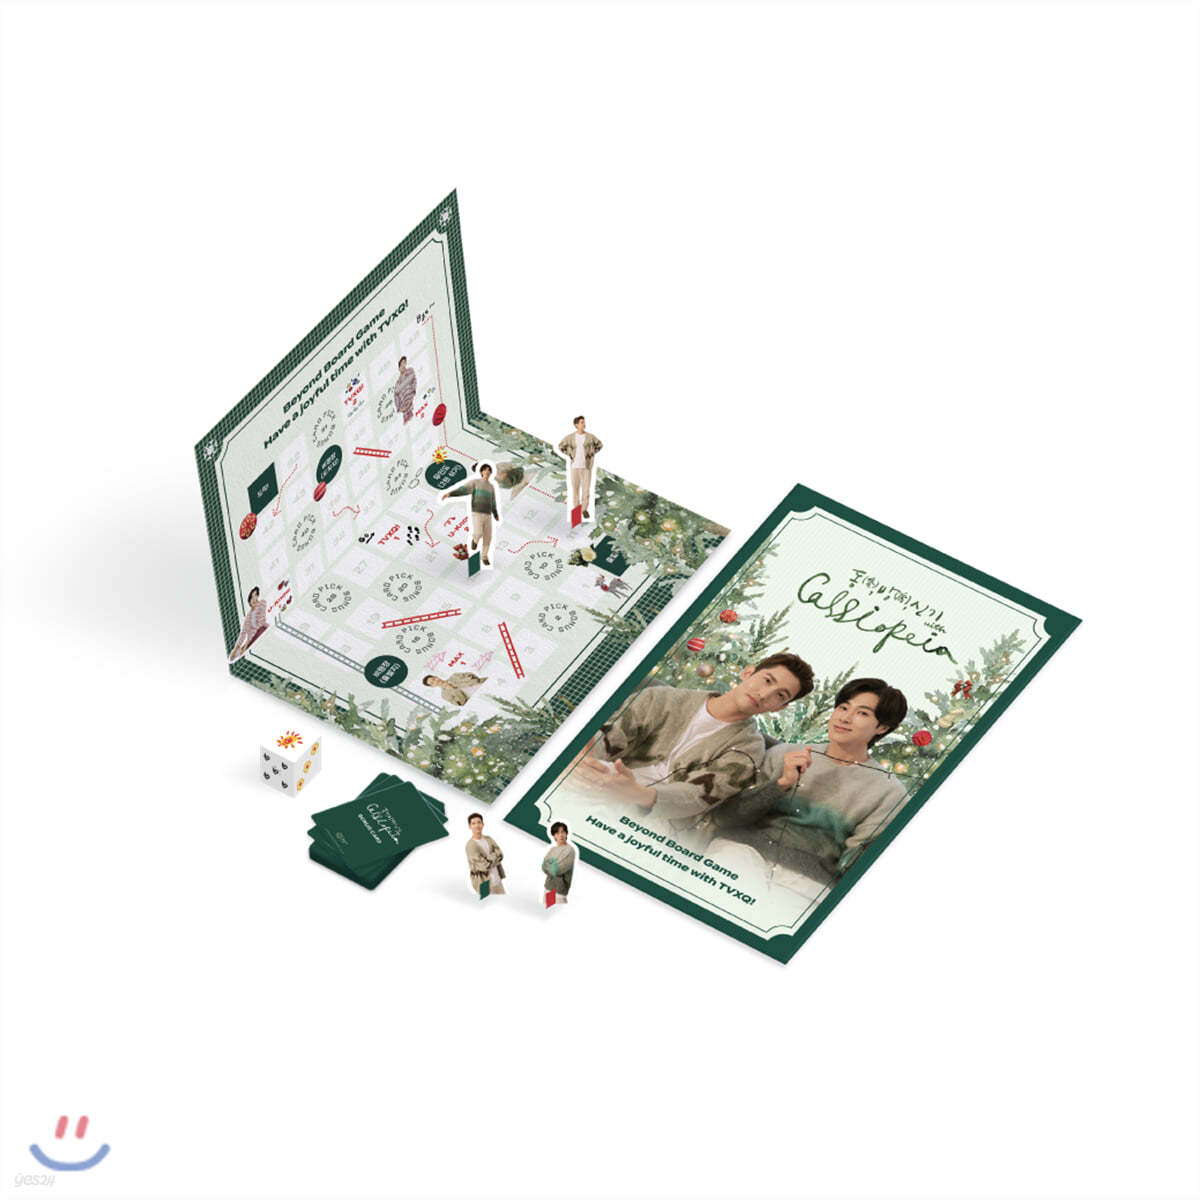 TVXQ! Beyond Board Game 2020 TVXQ! ONLINE FANMEETING 동(冬),방(房),신기 with Cassiopeia